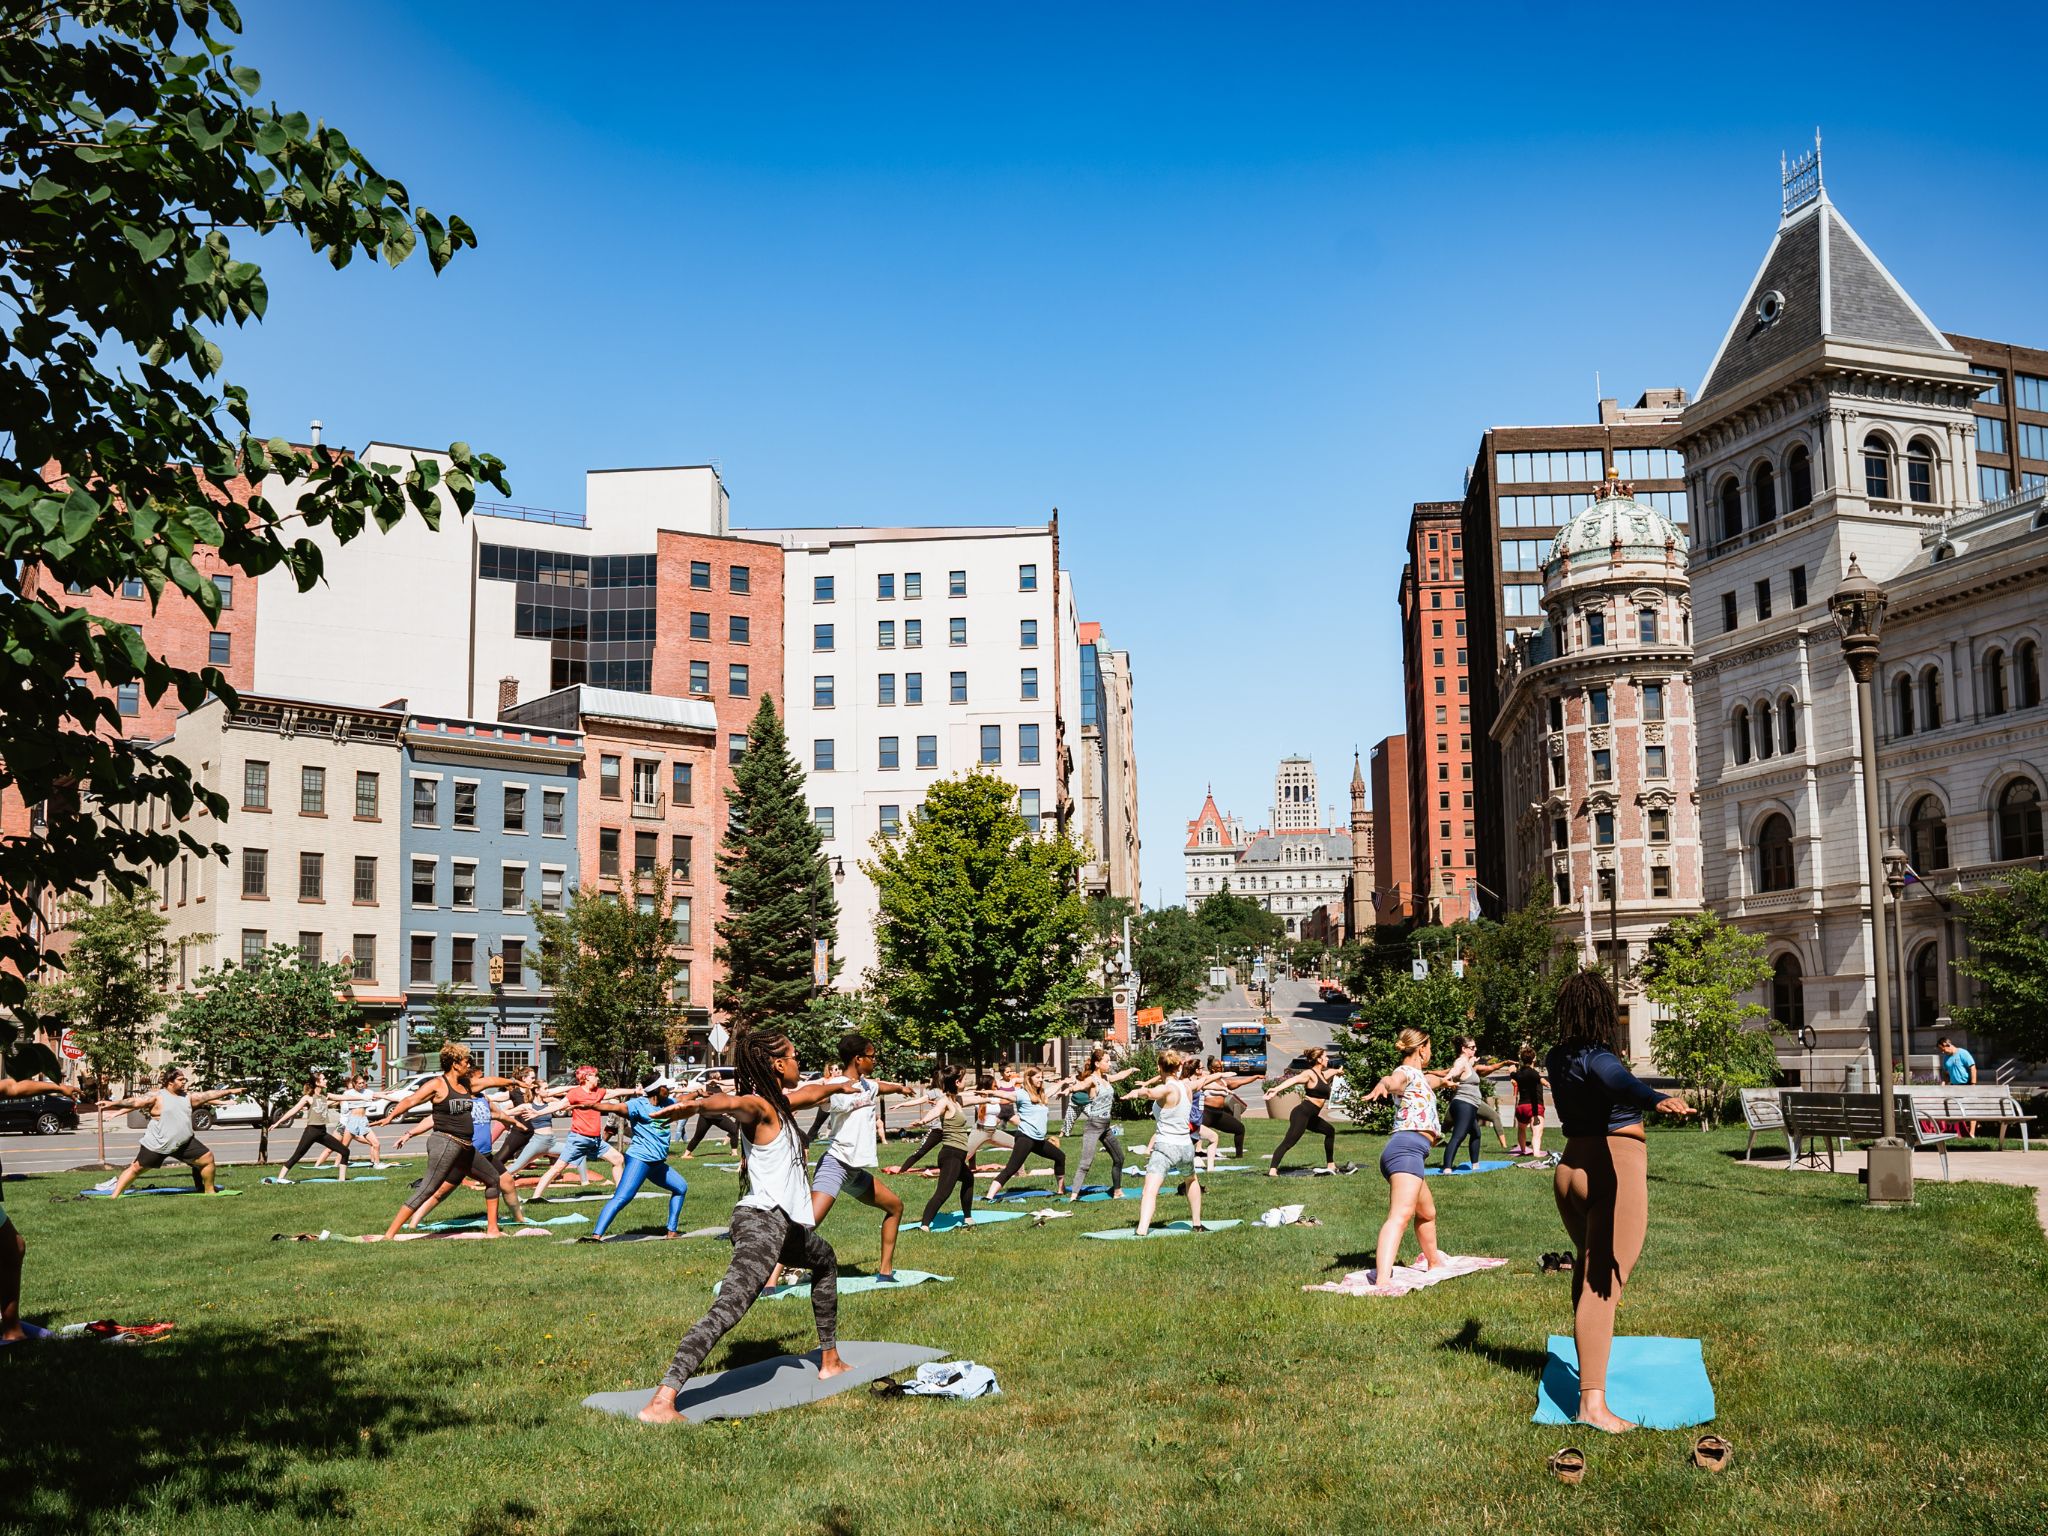 People in foreground doing yoga on lawn with city buildings in background